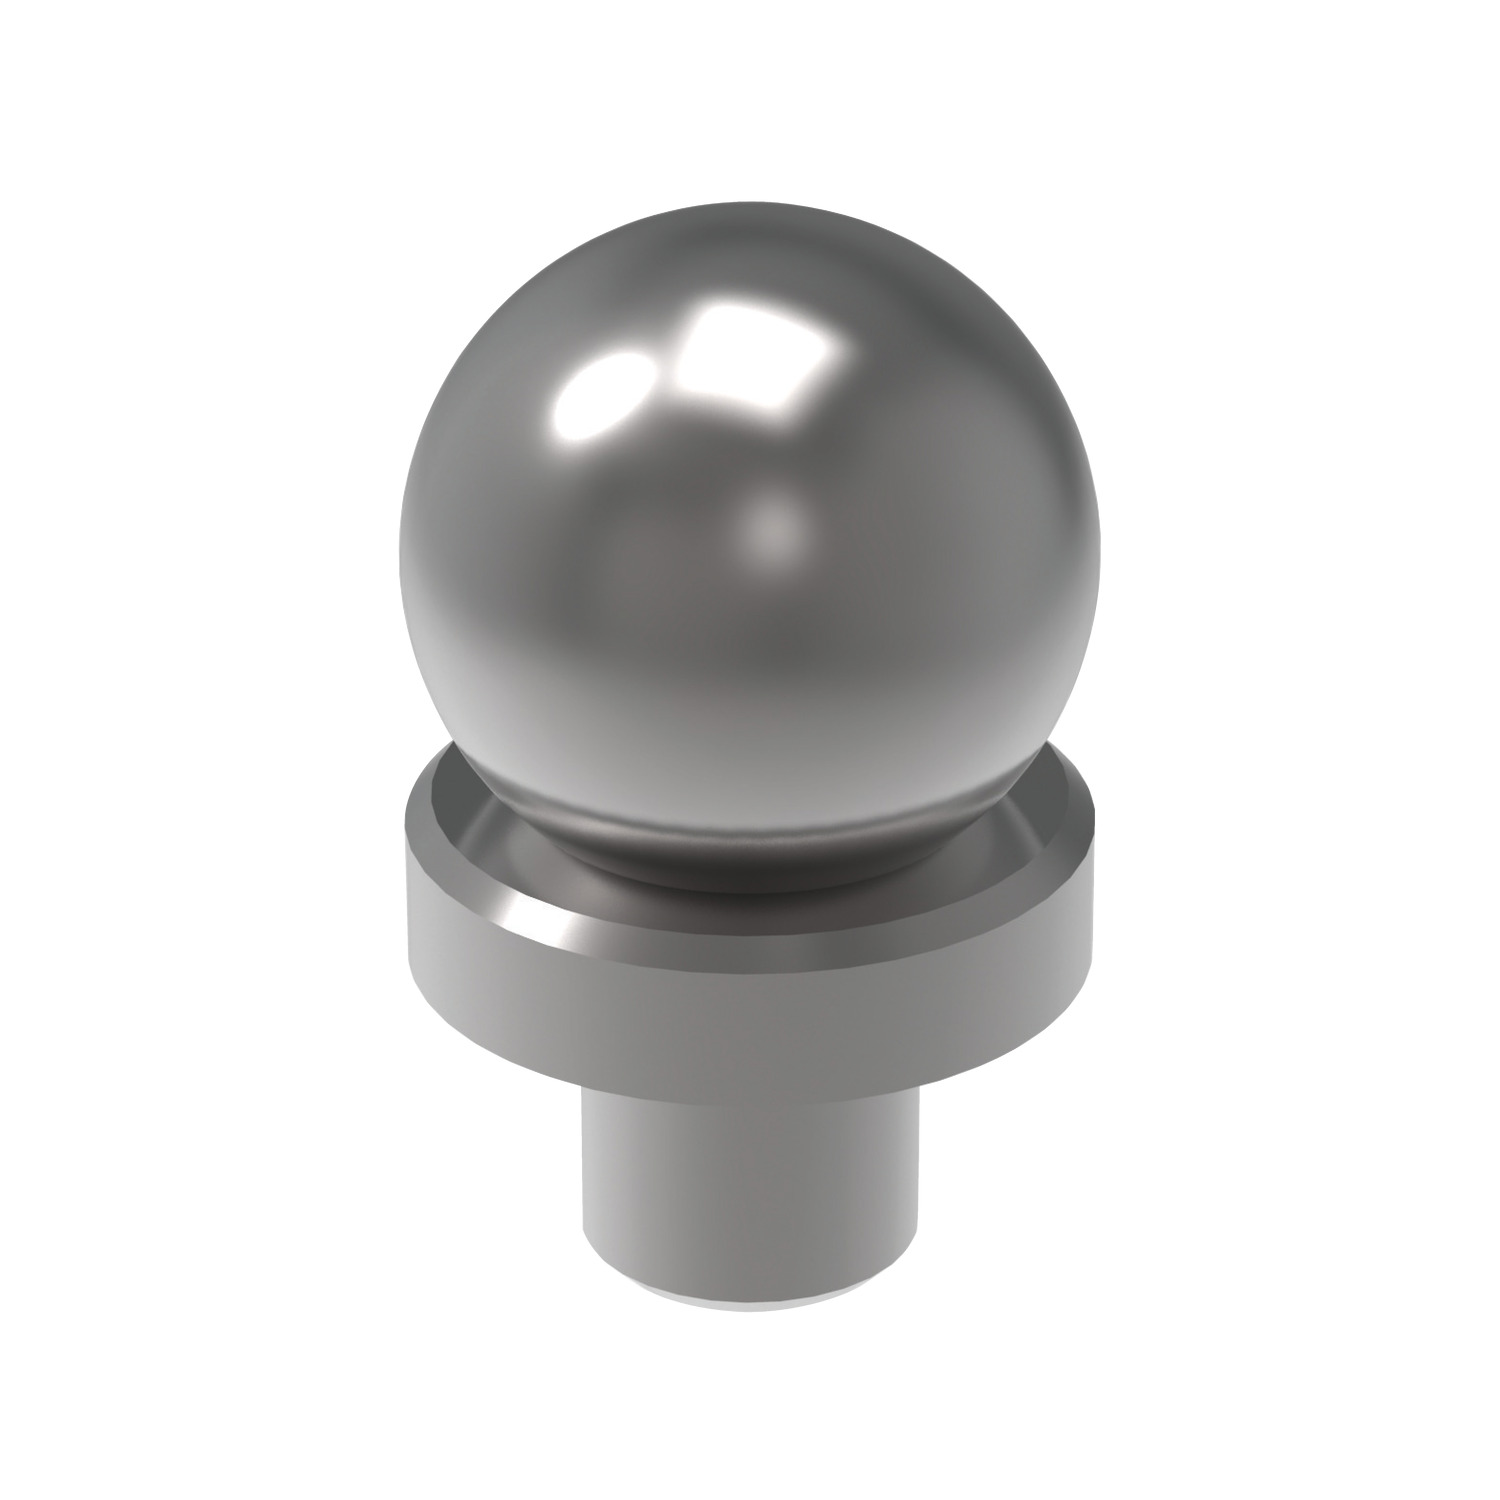 20500.W0064I Inspection Balls - Imperial - Steel. 0,6250 - 0,3750 - 1,42 - 0,4500